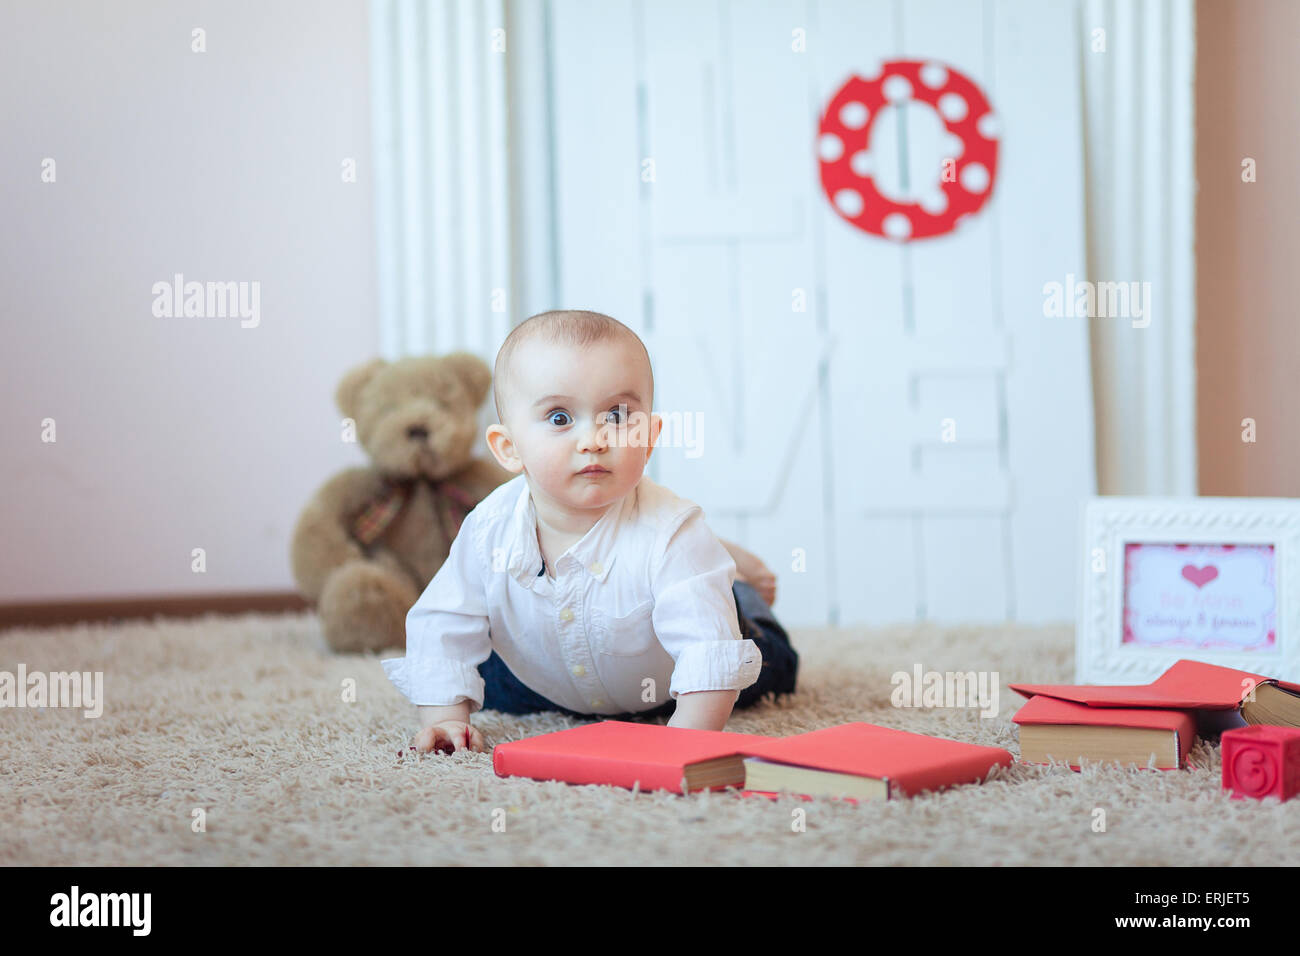 Funny baby with books Banque D'Images